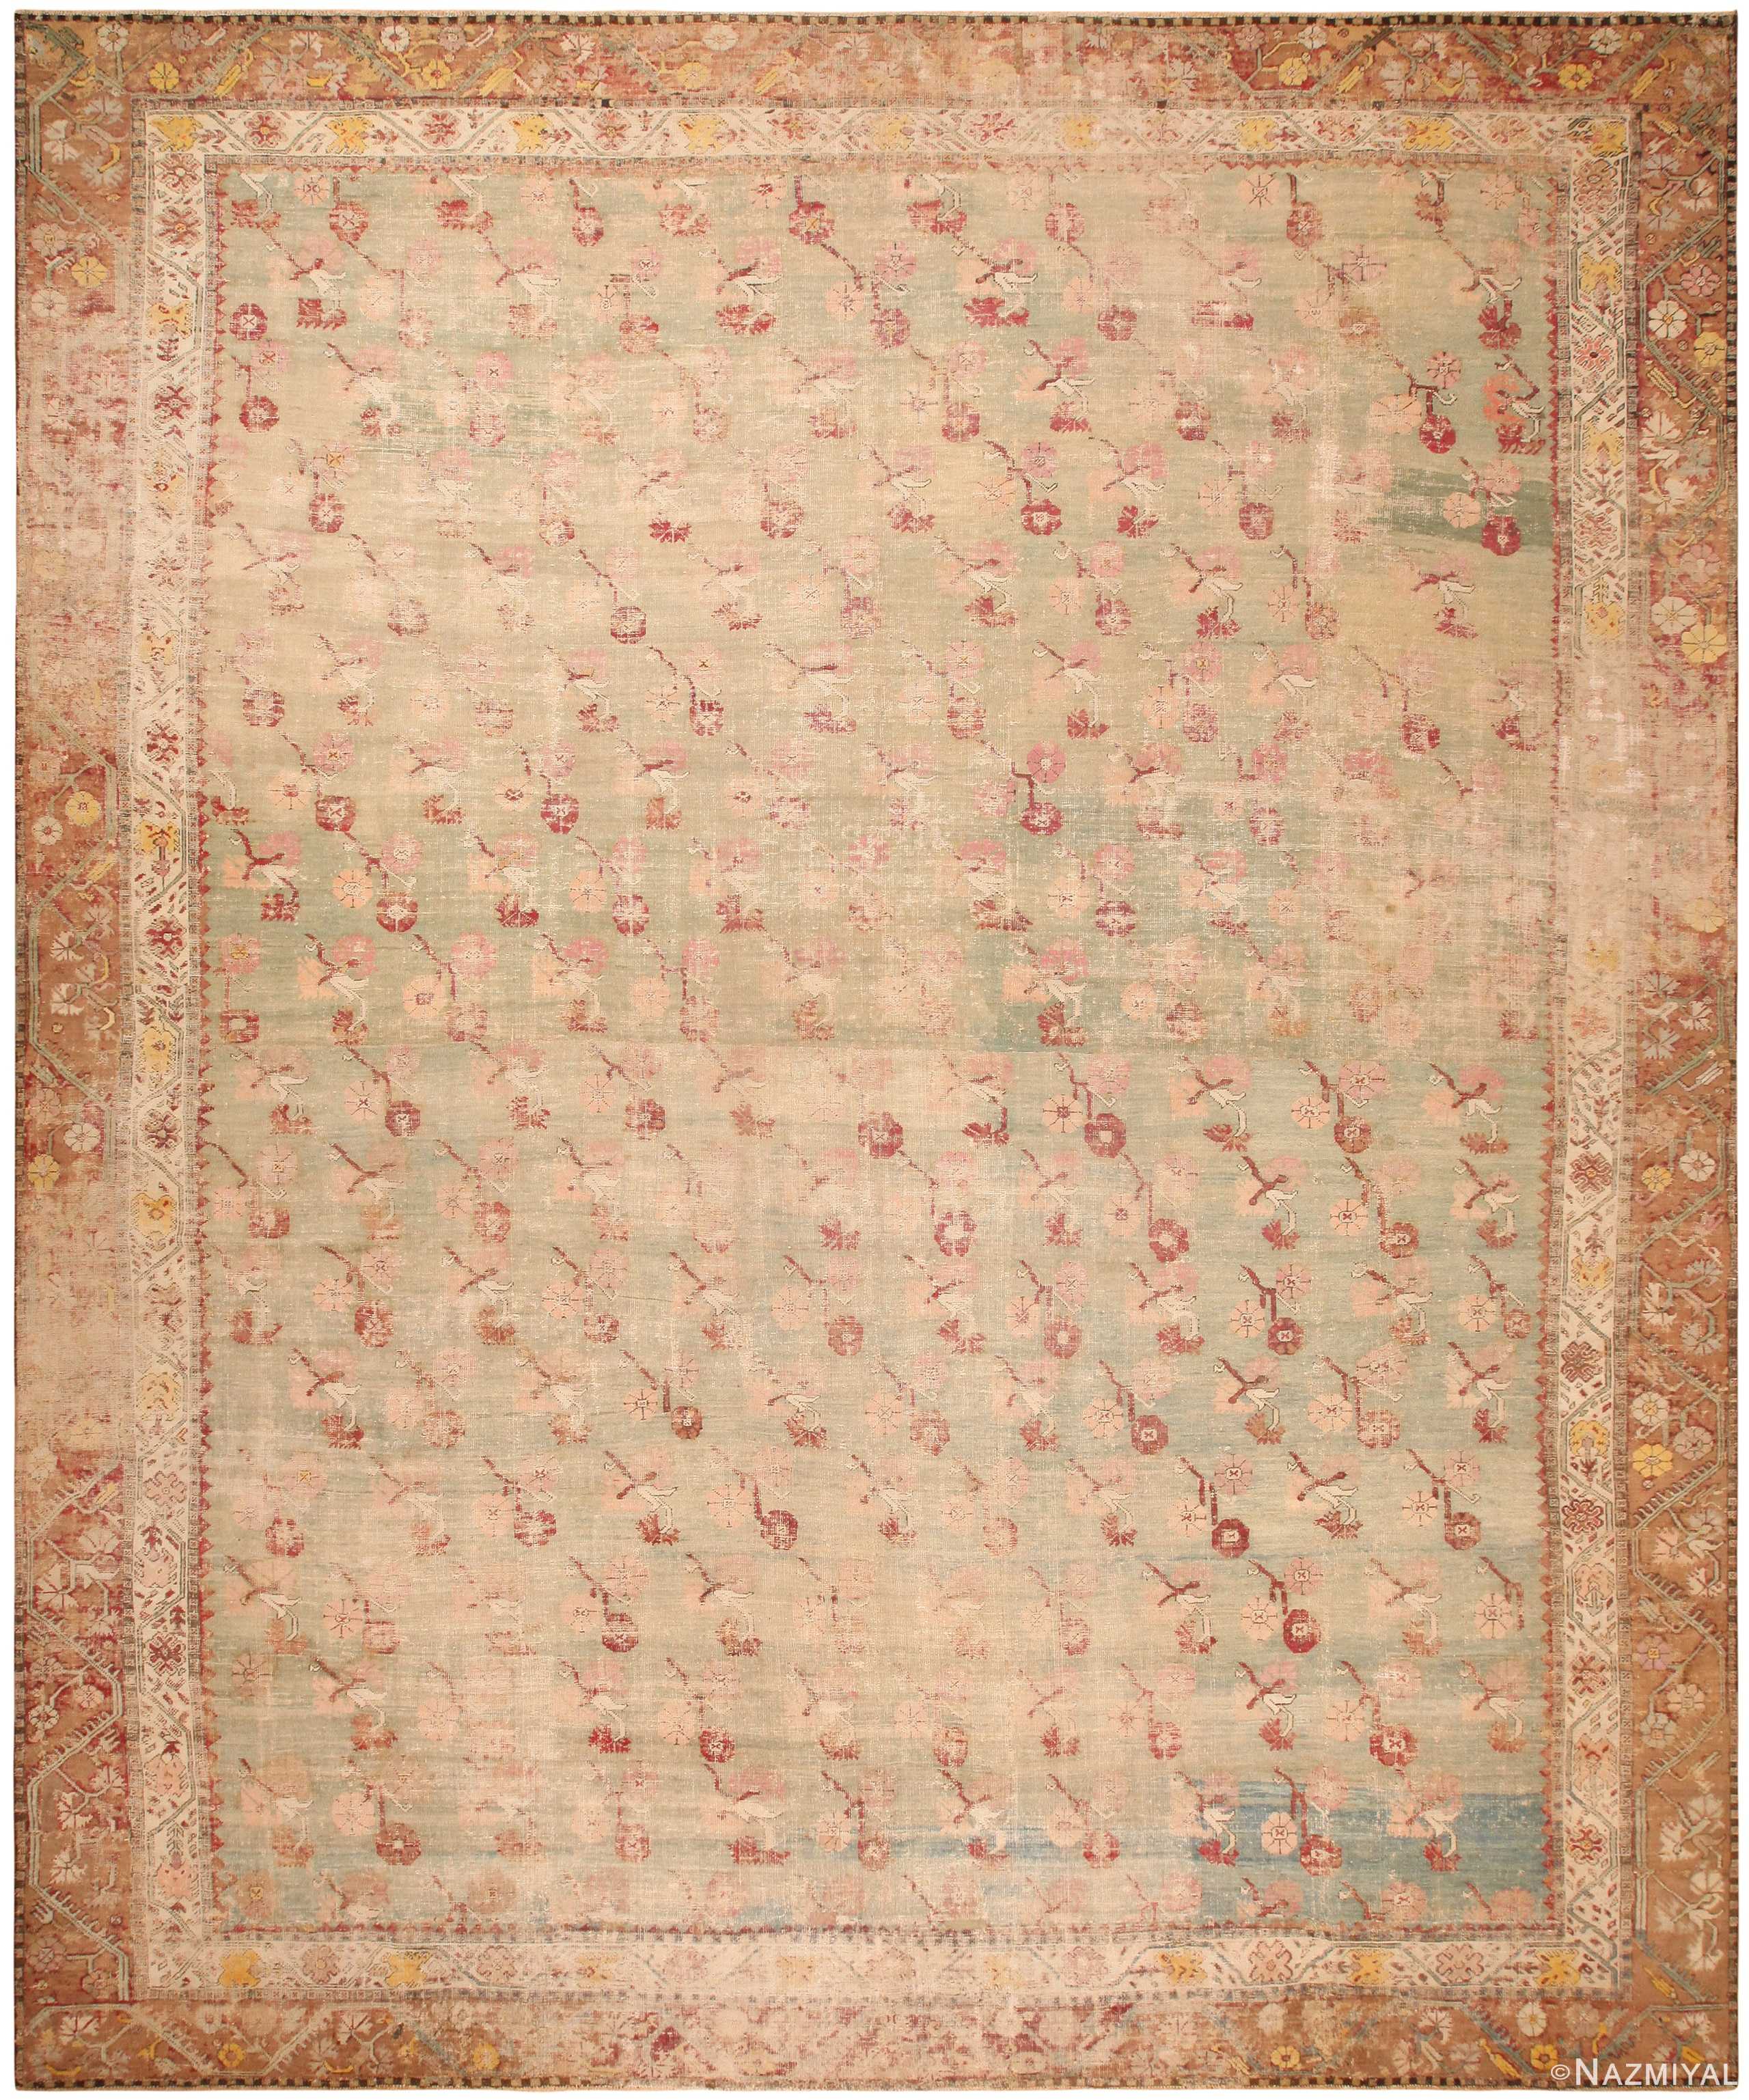 Large Antique Turkish Ghiordes Rug 71443 by Nazmiyal Antique Rugs